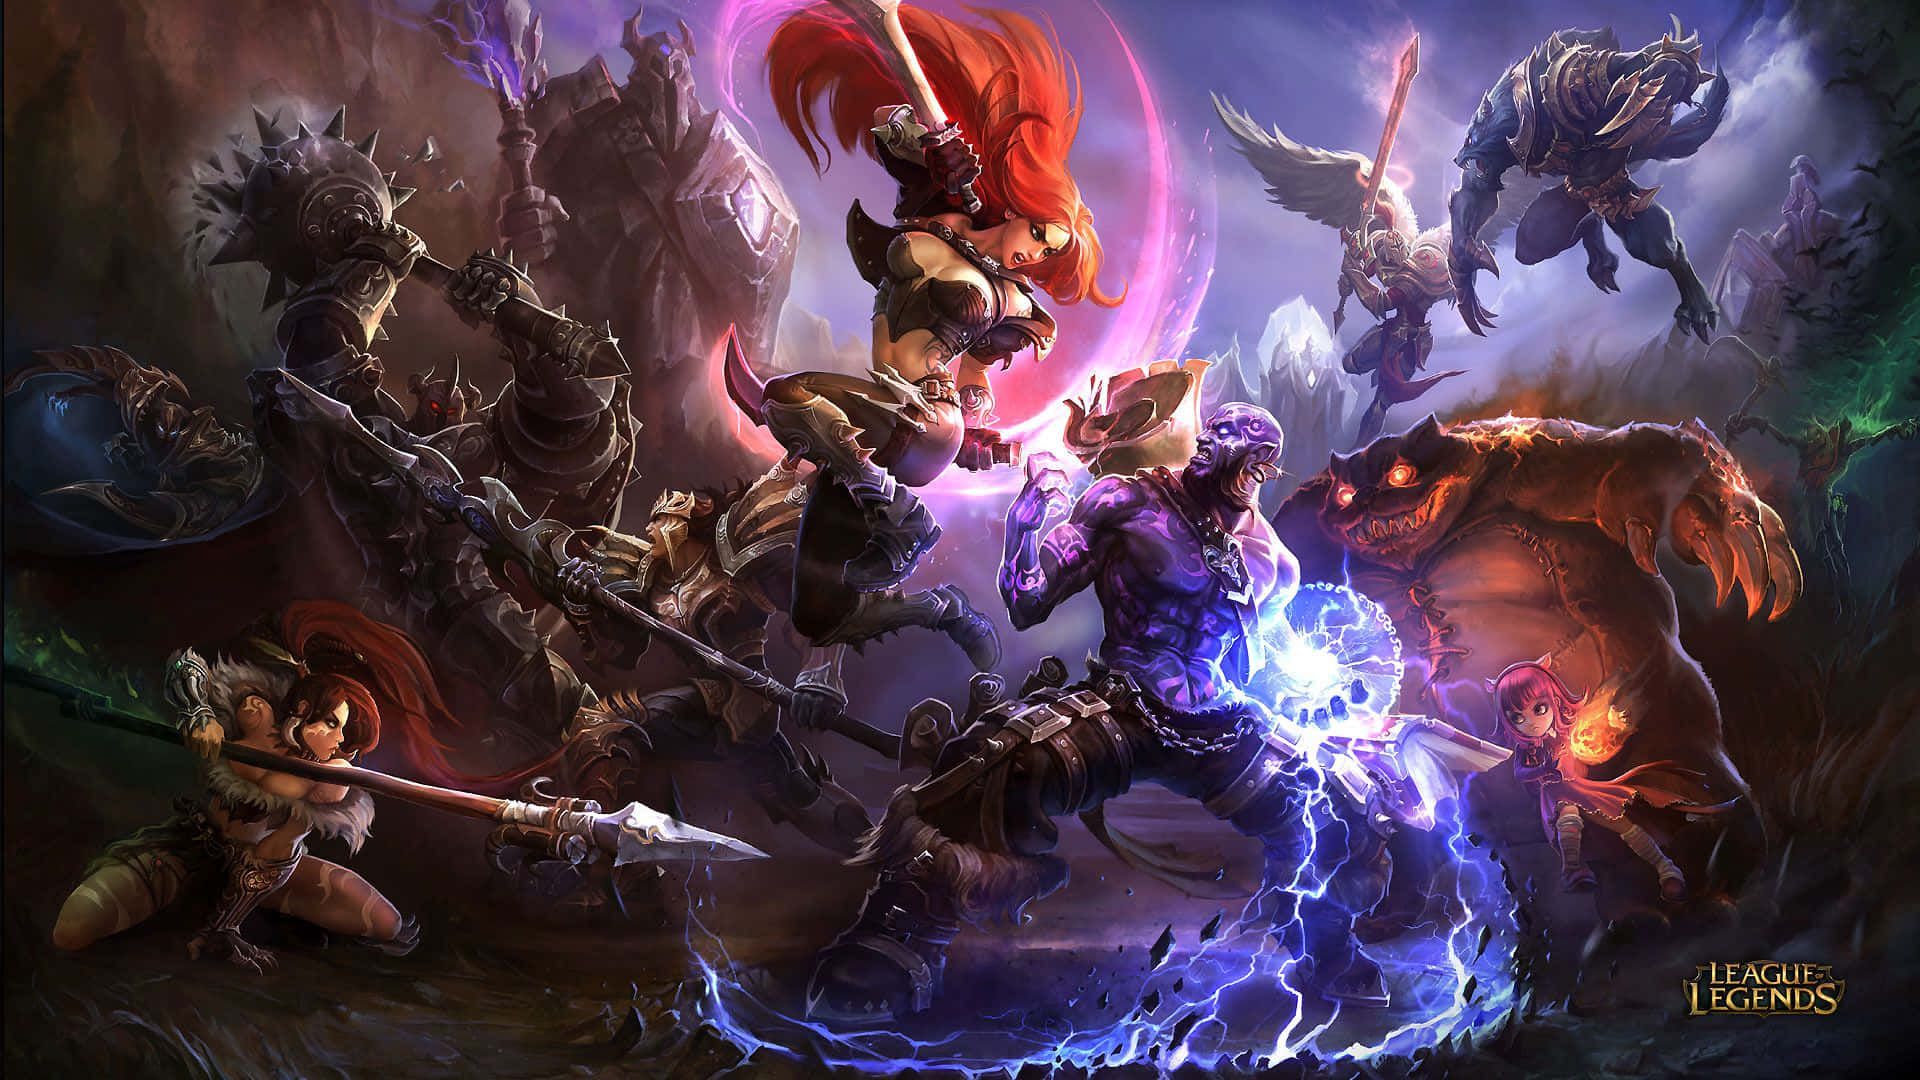 Join the fight in League of Legends!